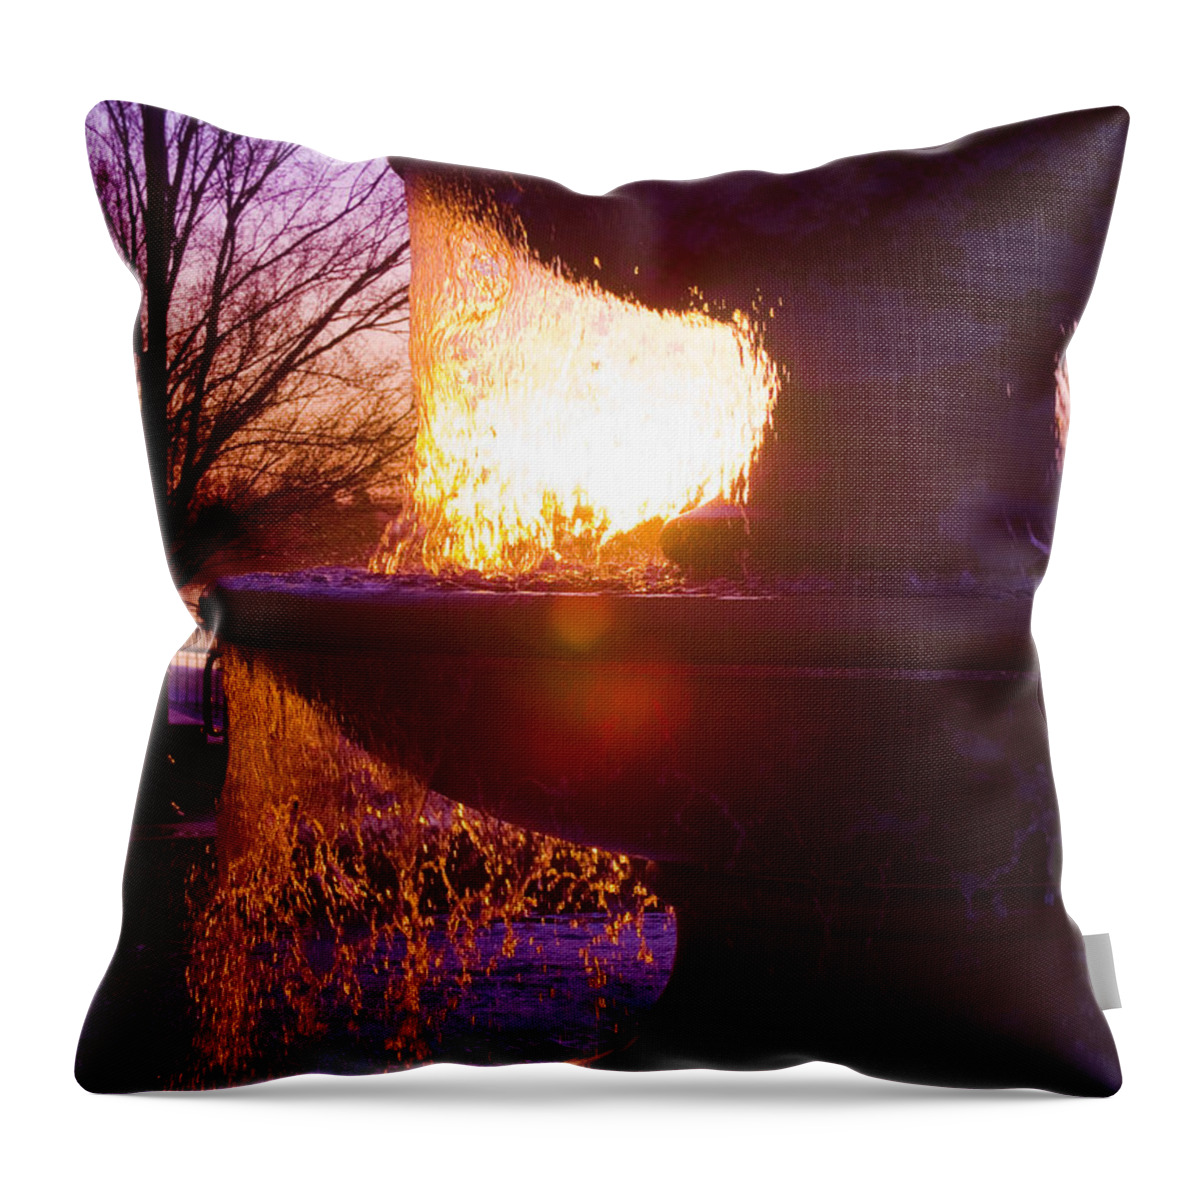 Architectural Throw Pillow featuring the photograph 6 Am by Kathy Besthorn